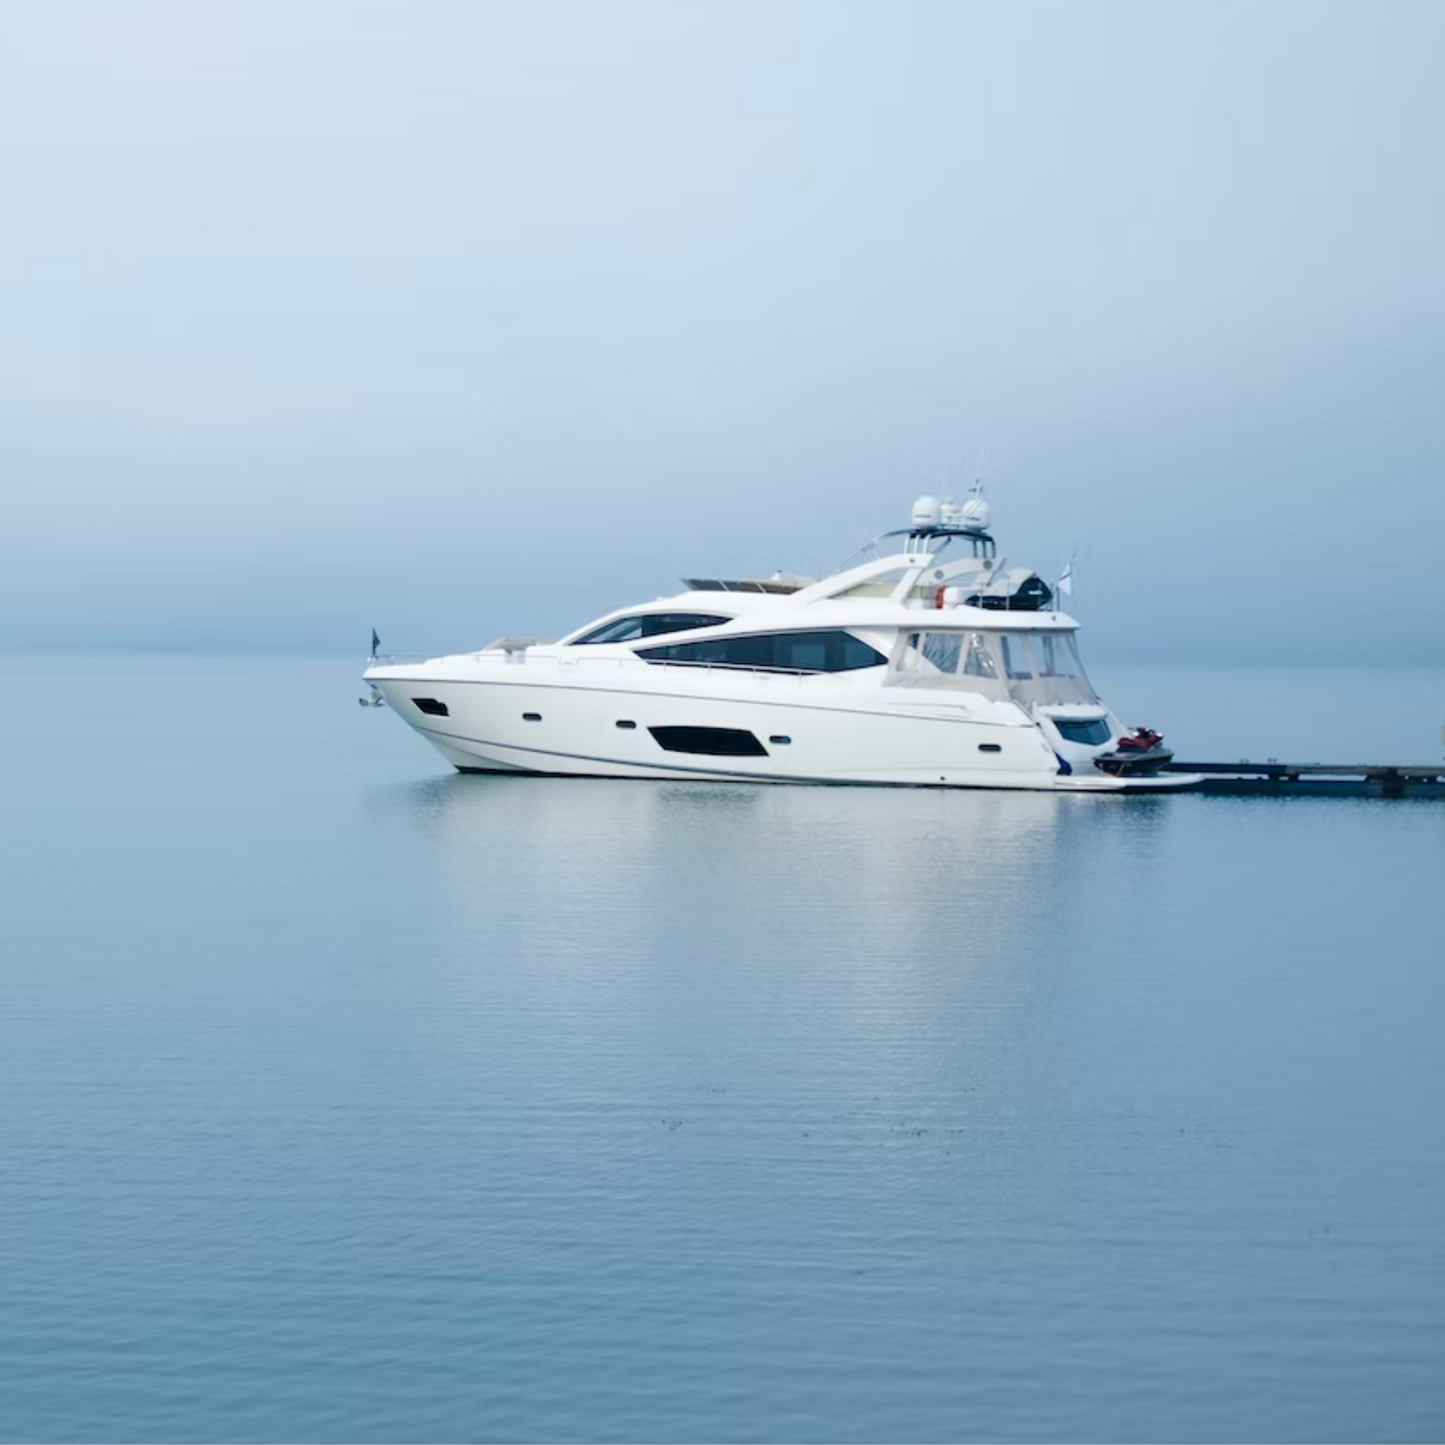 Motoryacht Winterized with Xtreme Heaters